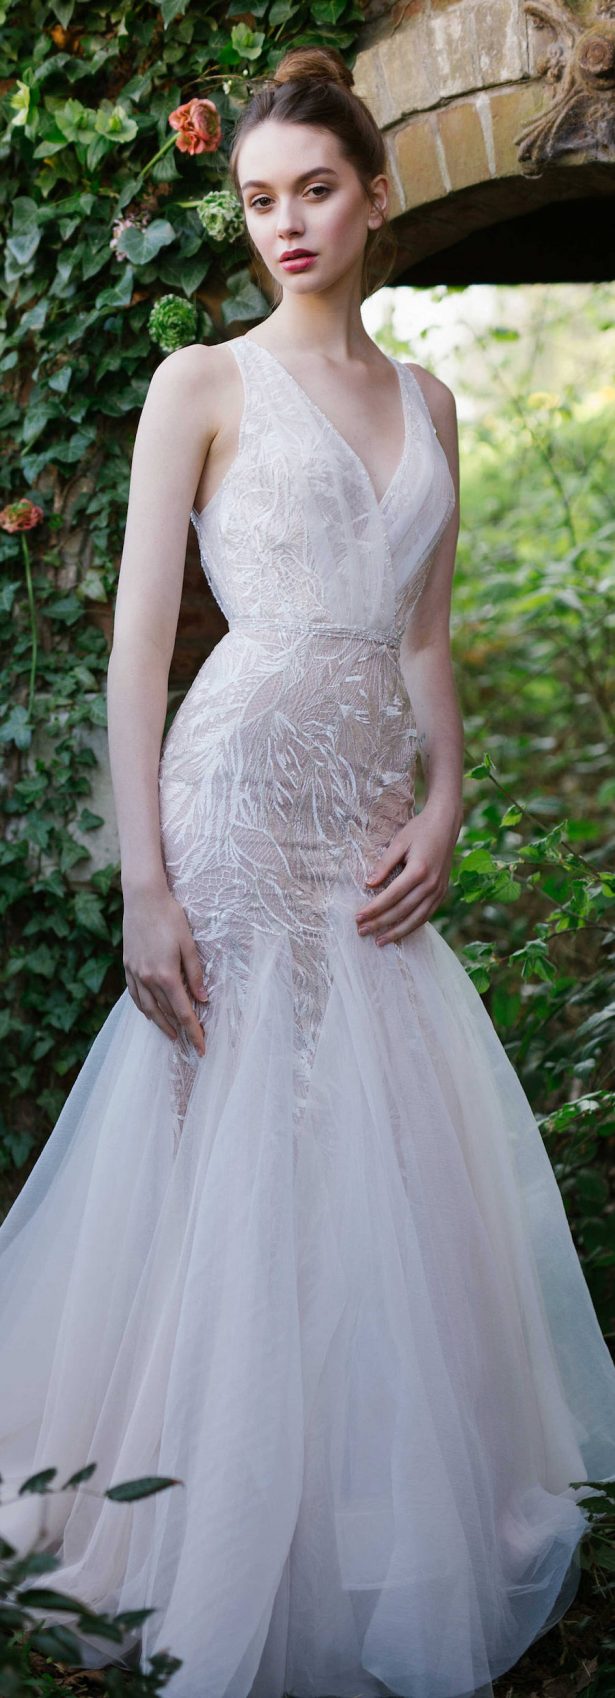 20 Fabulous Wedding Dresses you can buy on Etsy - Belle ...